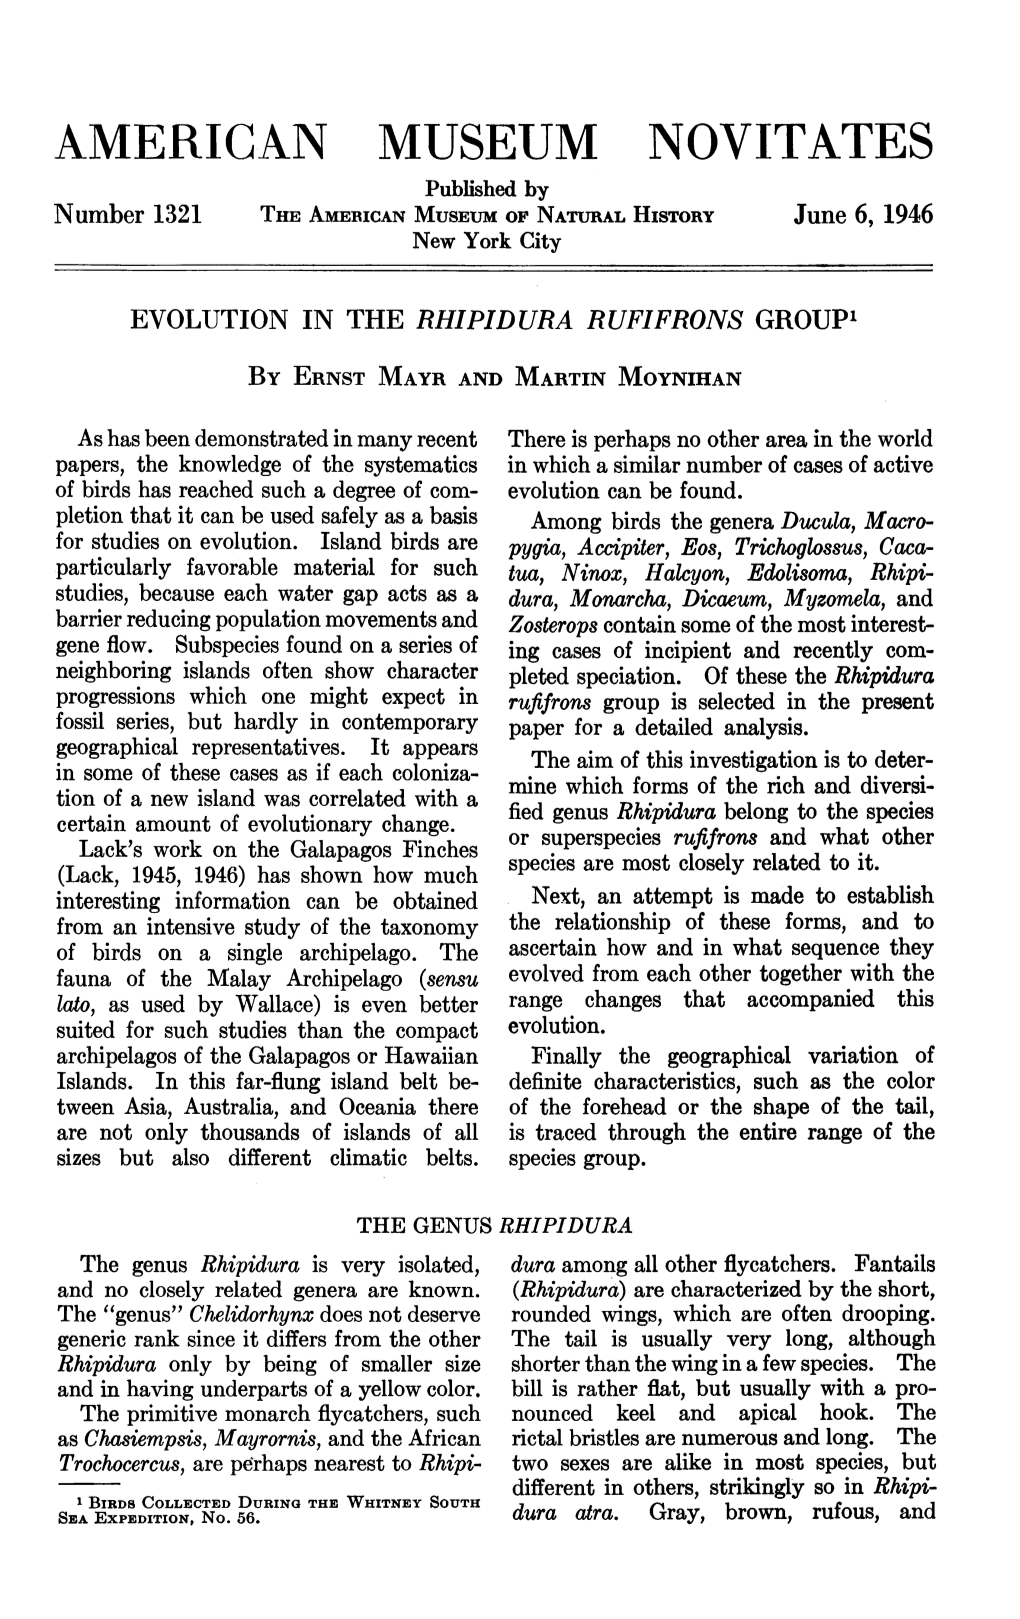 AMERICAN MUSEUM NOVITATES Published by Number 1321 the AMERICAN MUSEUM of NATURAL HISTORY June 6, 1946 New York City